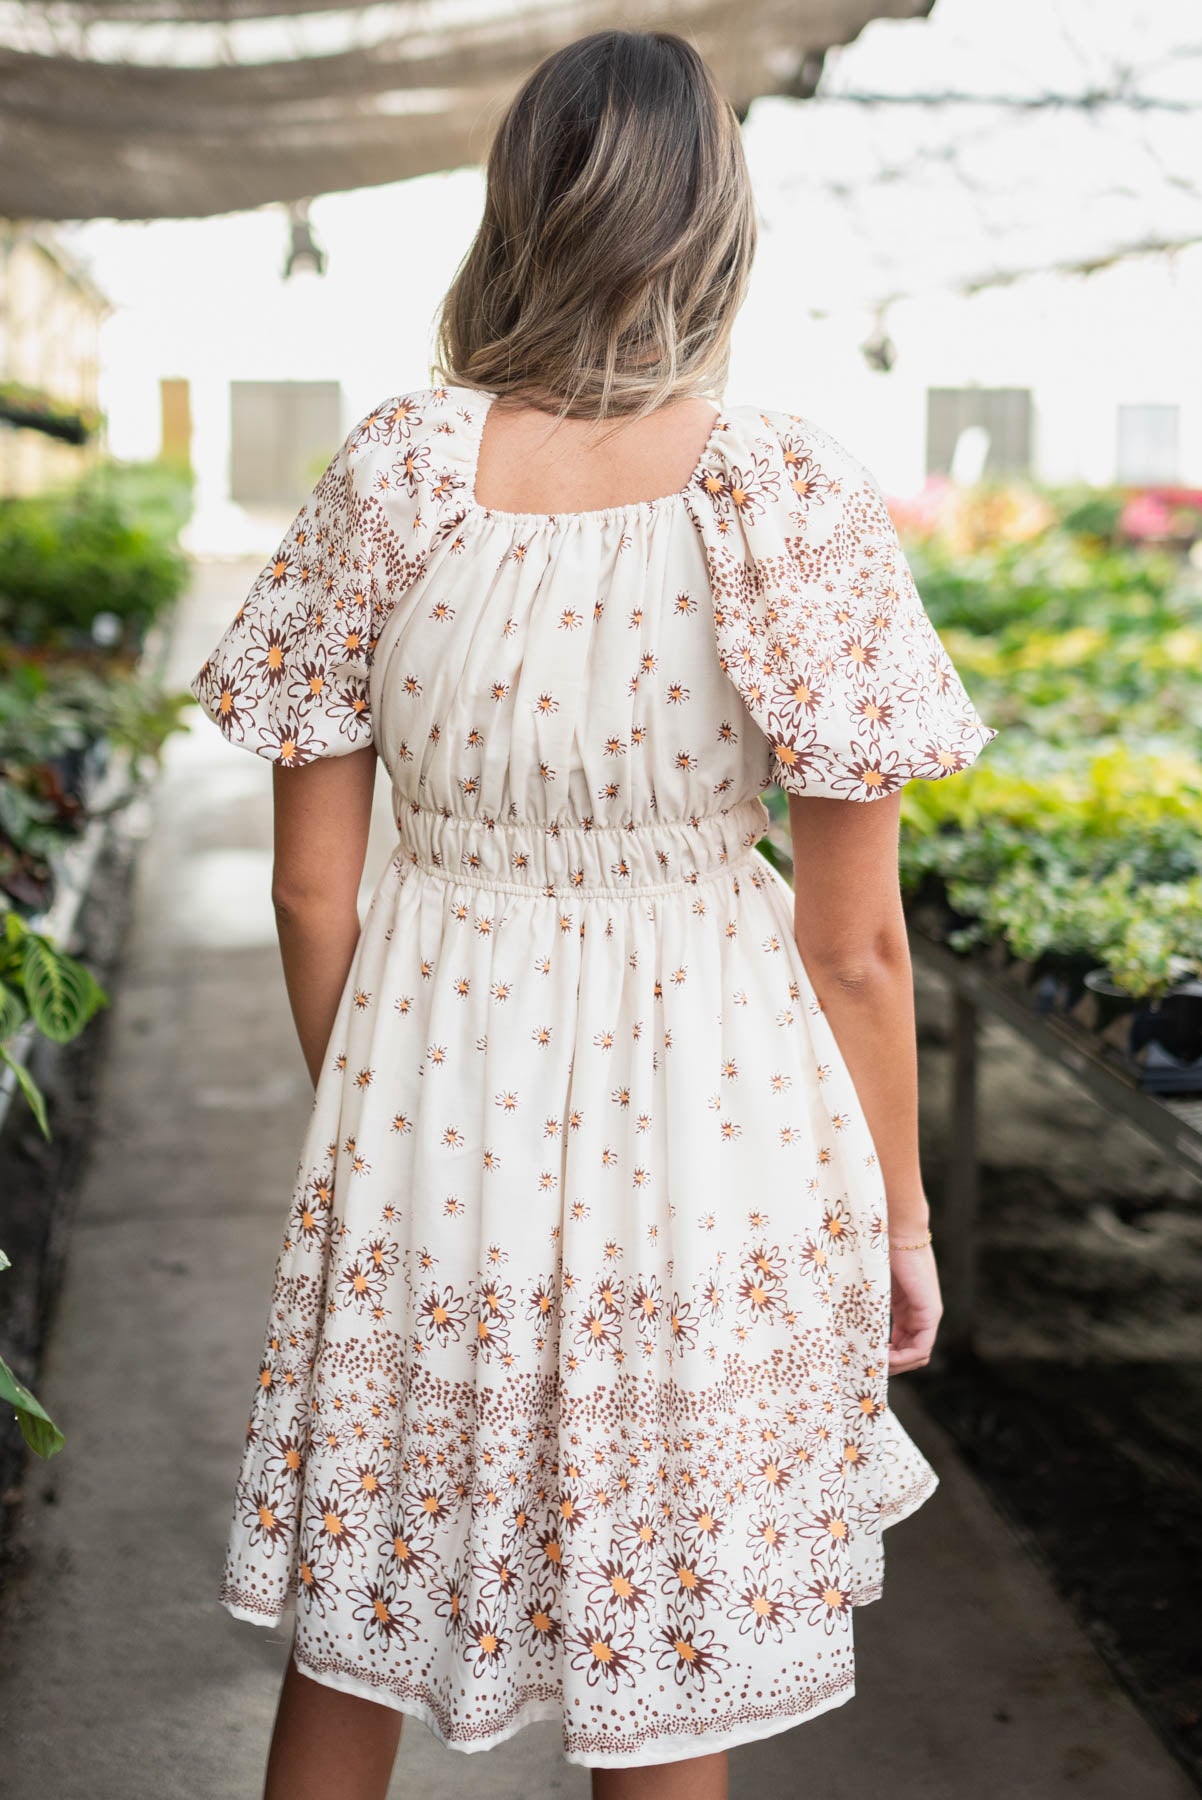 Back view of the beige daisy dress